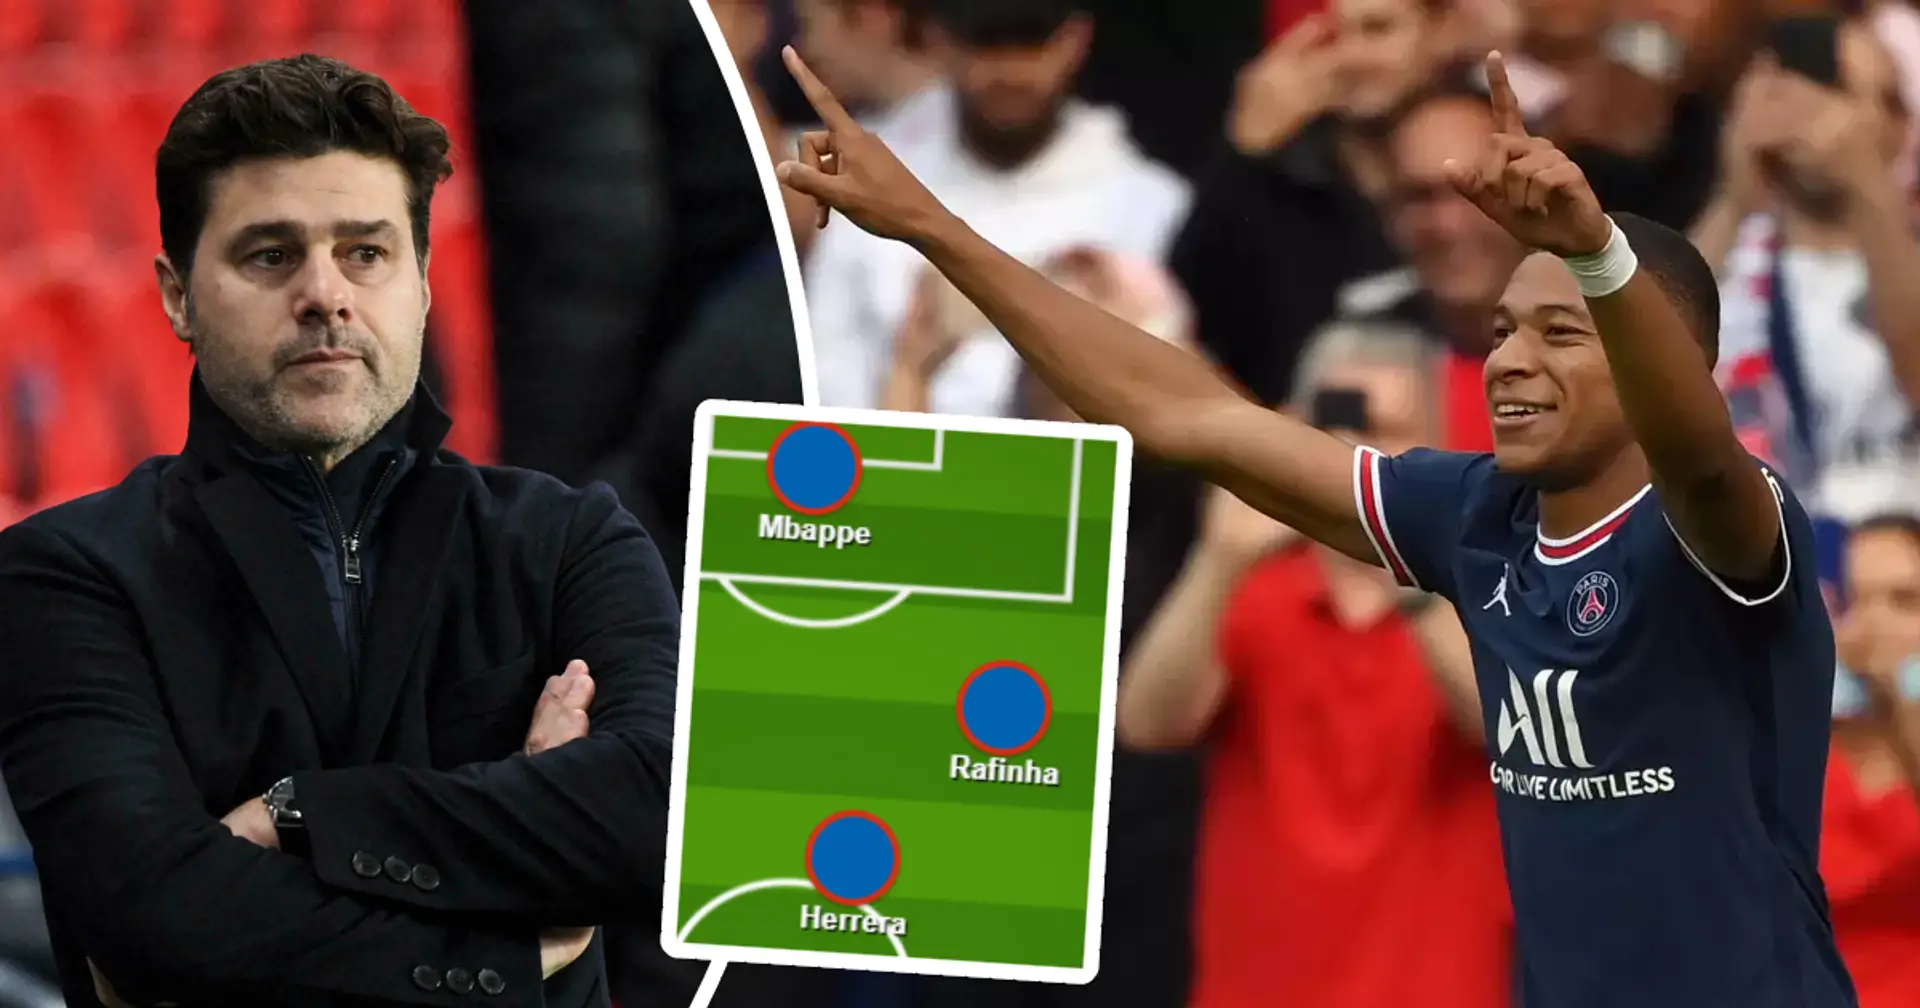 Mbappe as No 9, Rafinha's hybrid role: Tactics behind PSG's 4-0 thrashing of Clermont